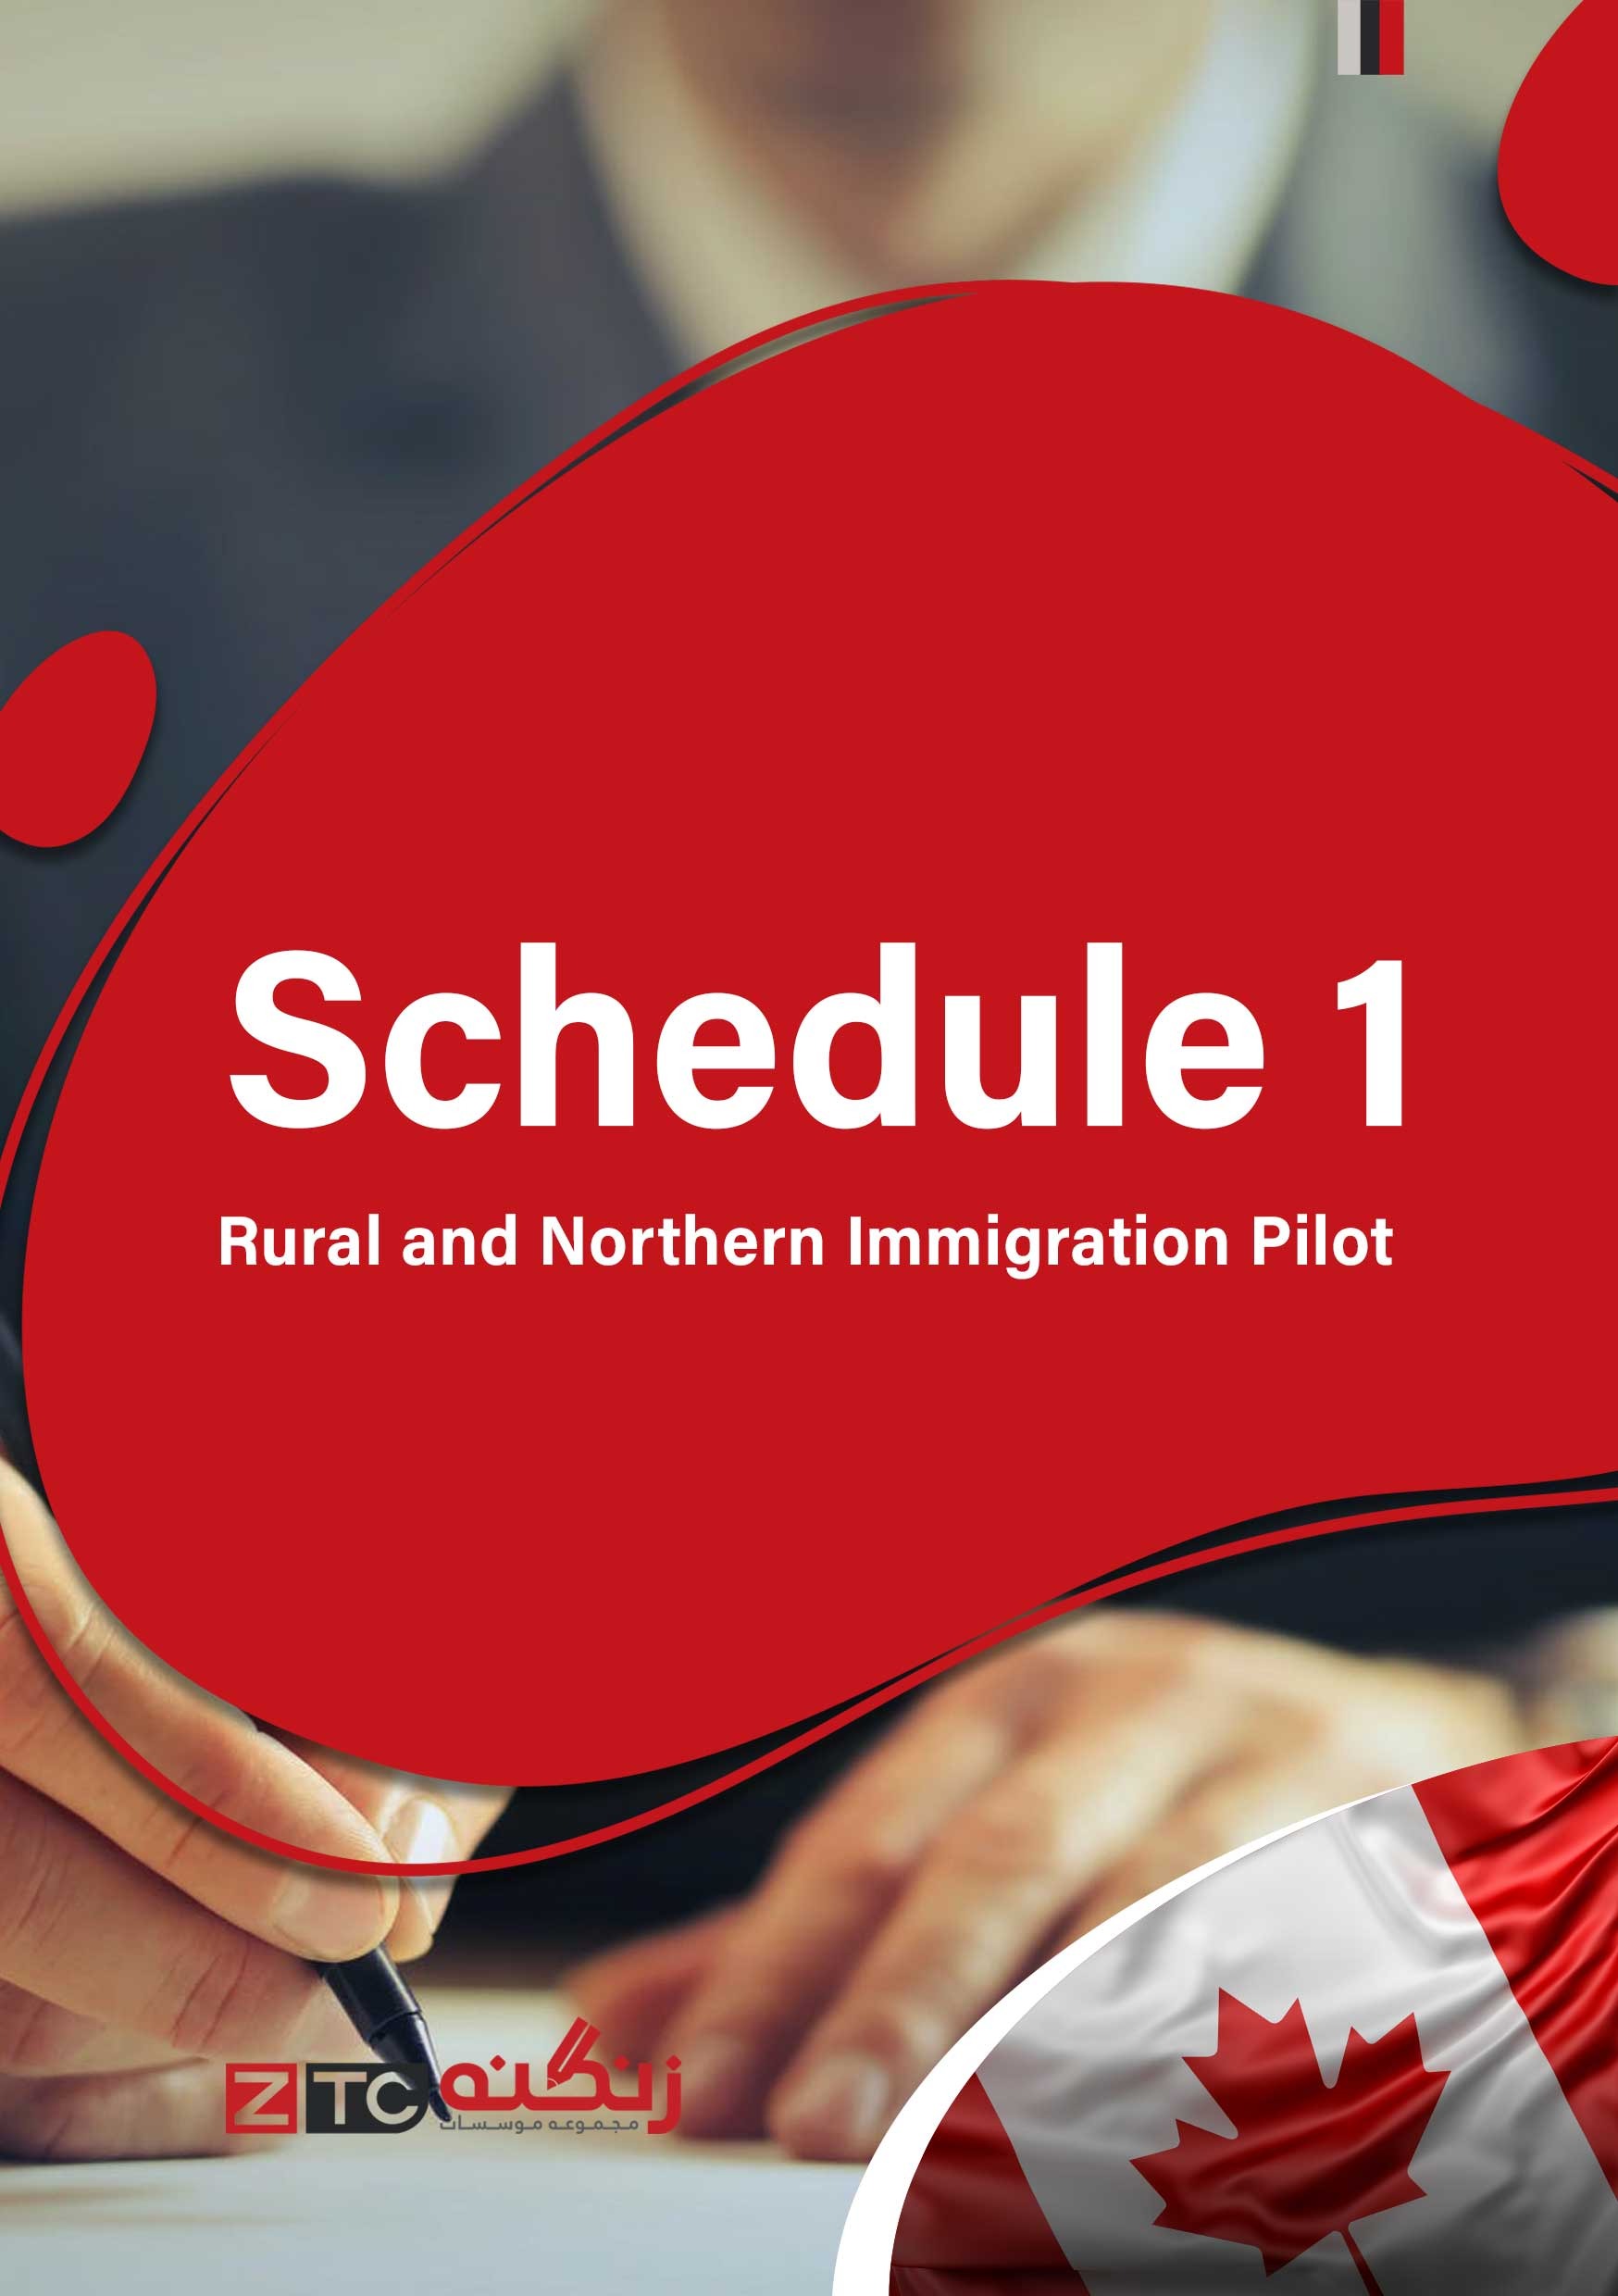 Schedule 1 – Rural and Northern Immigration Pilot